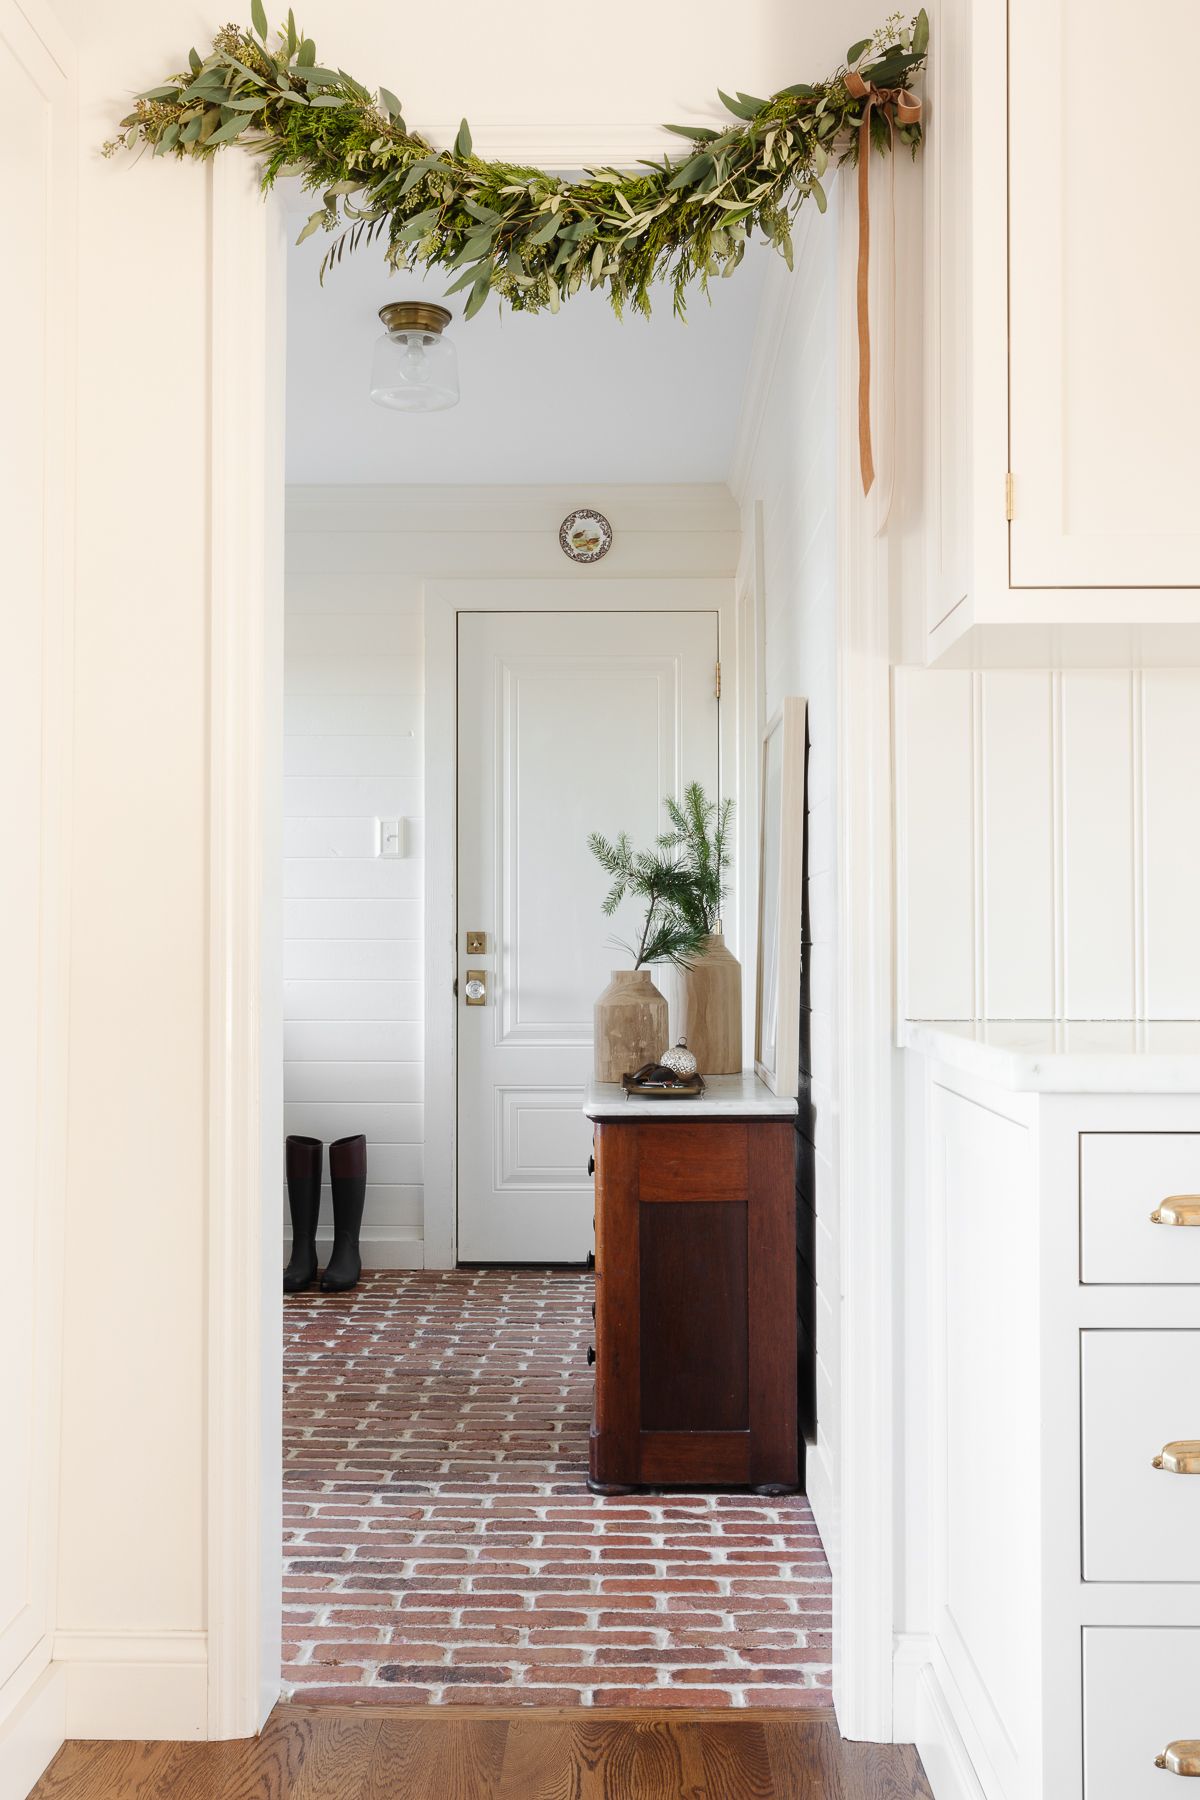 Fresh Christmas green garland over an entrance hall in a creamy kitchen.